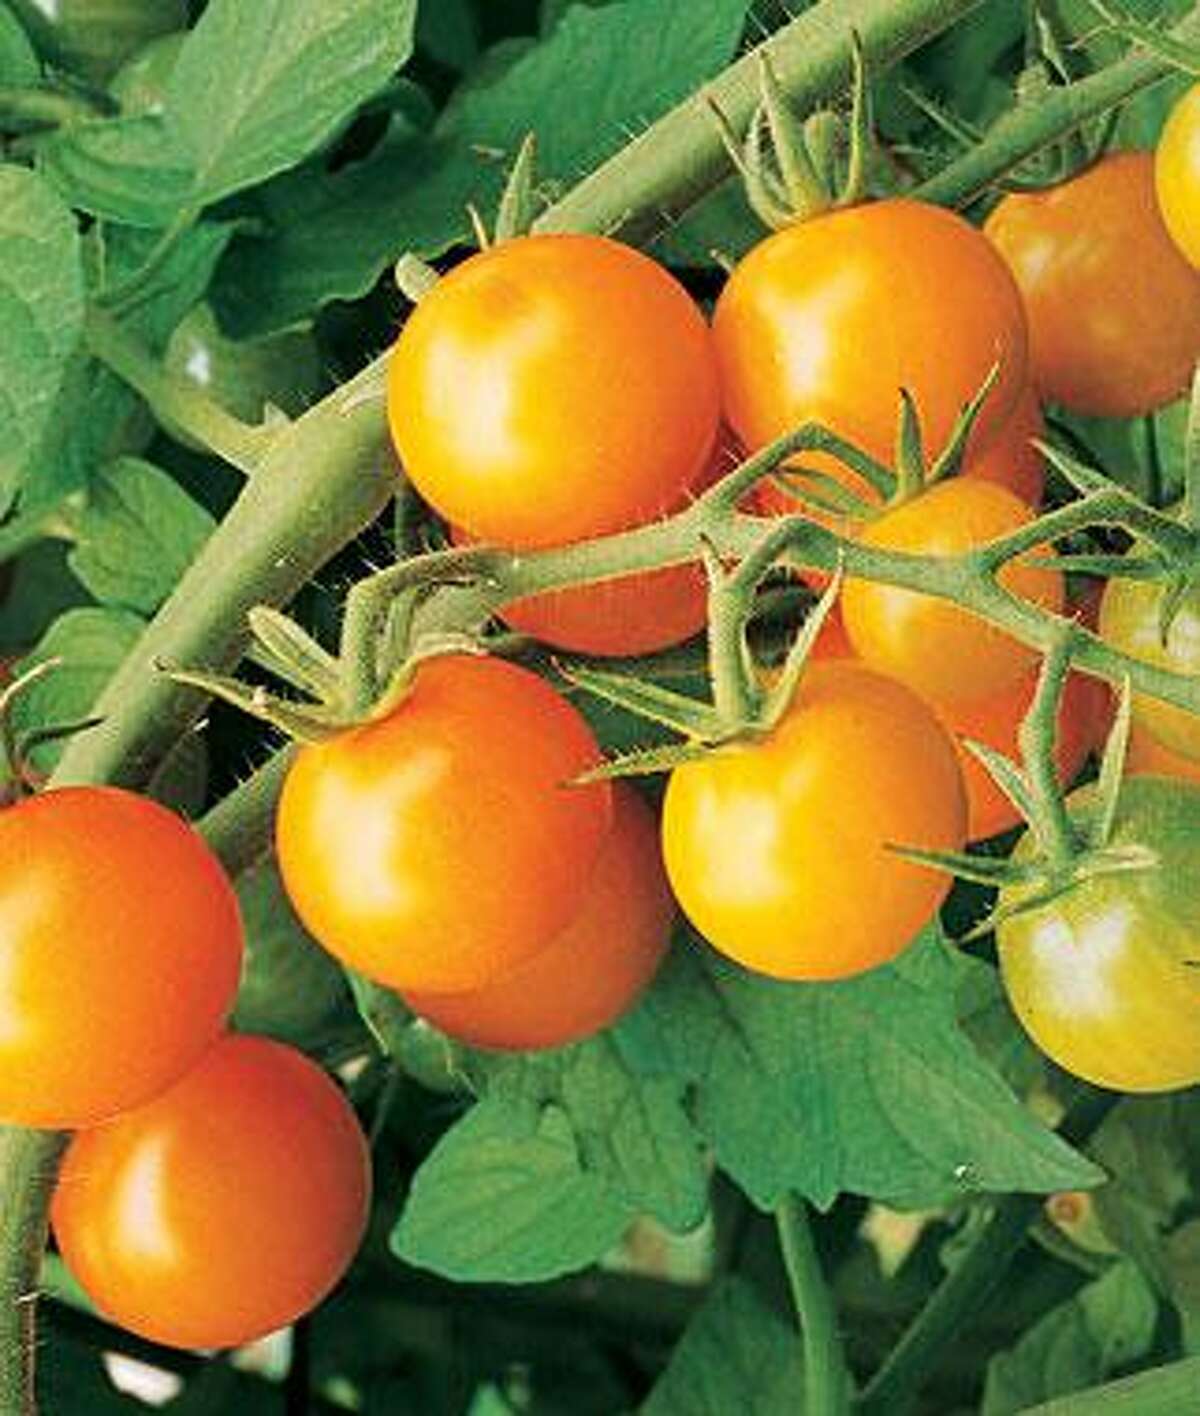 Sungold cherry tomato is a popular tomato grown in the home garden